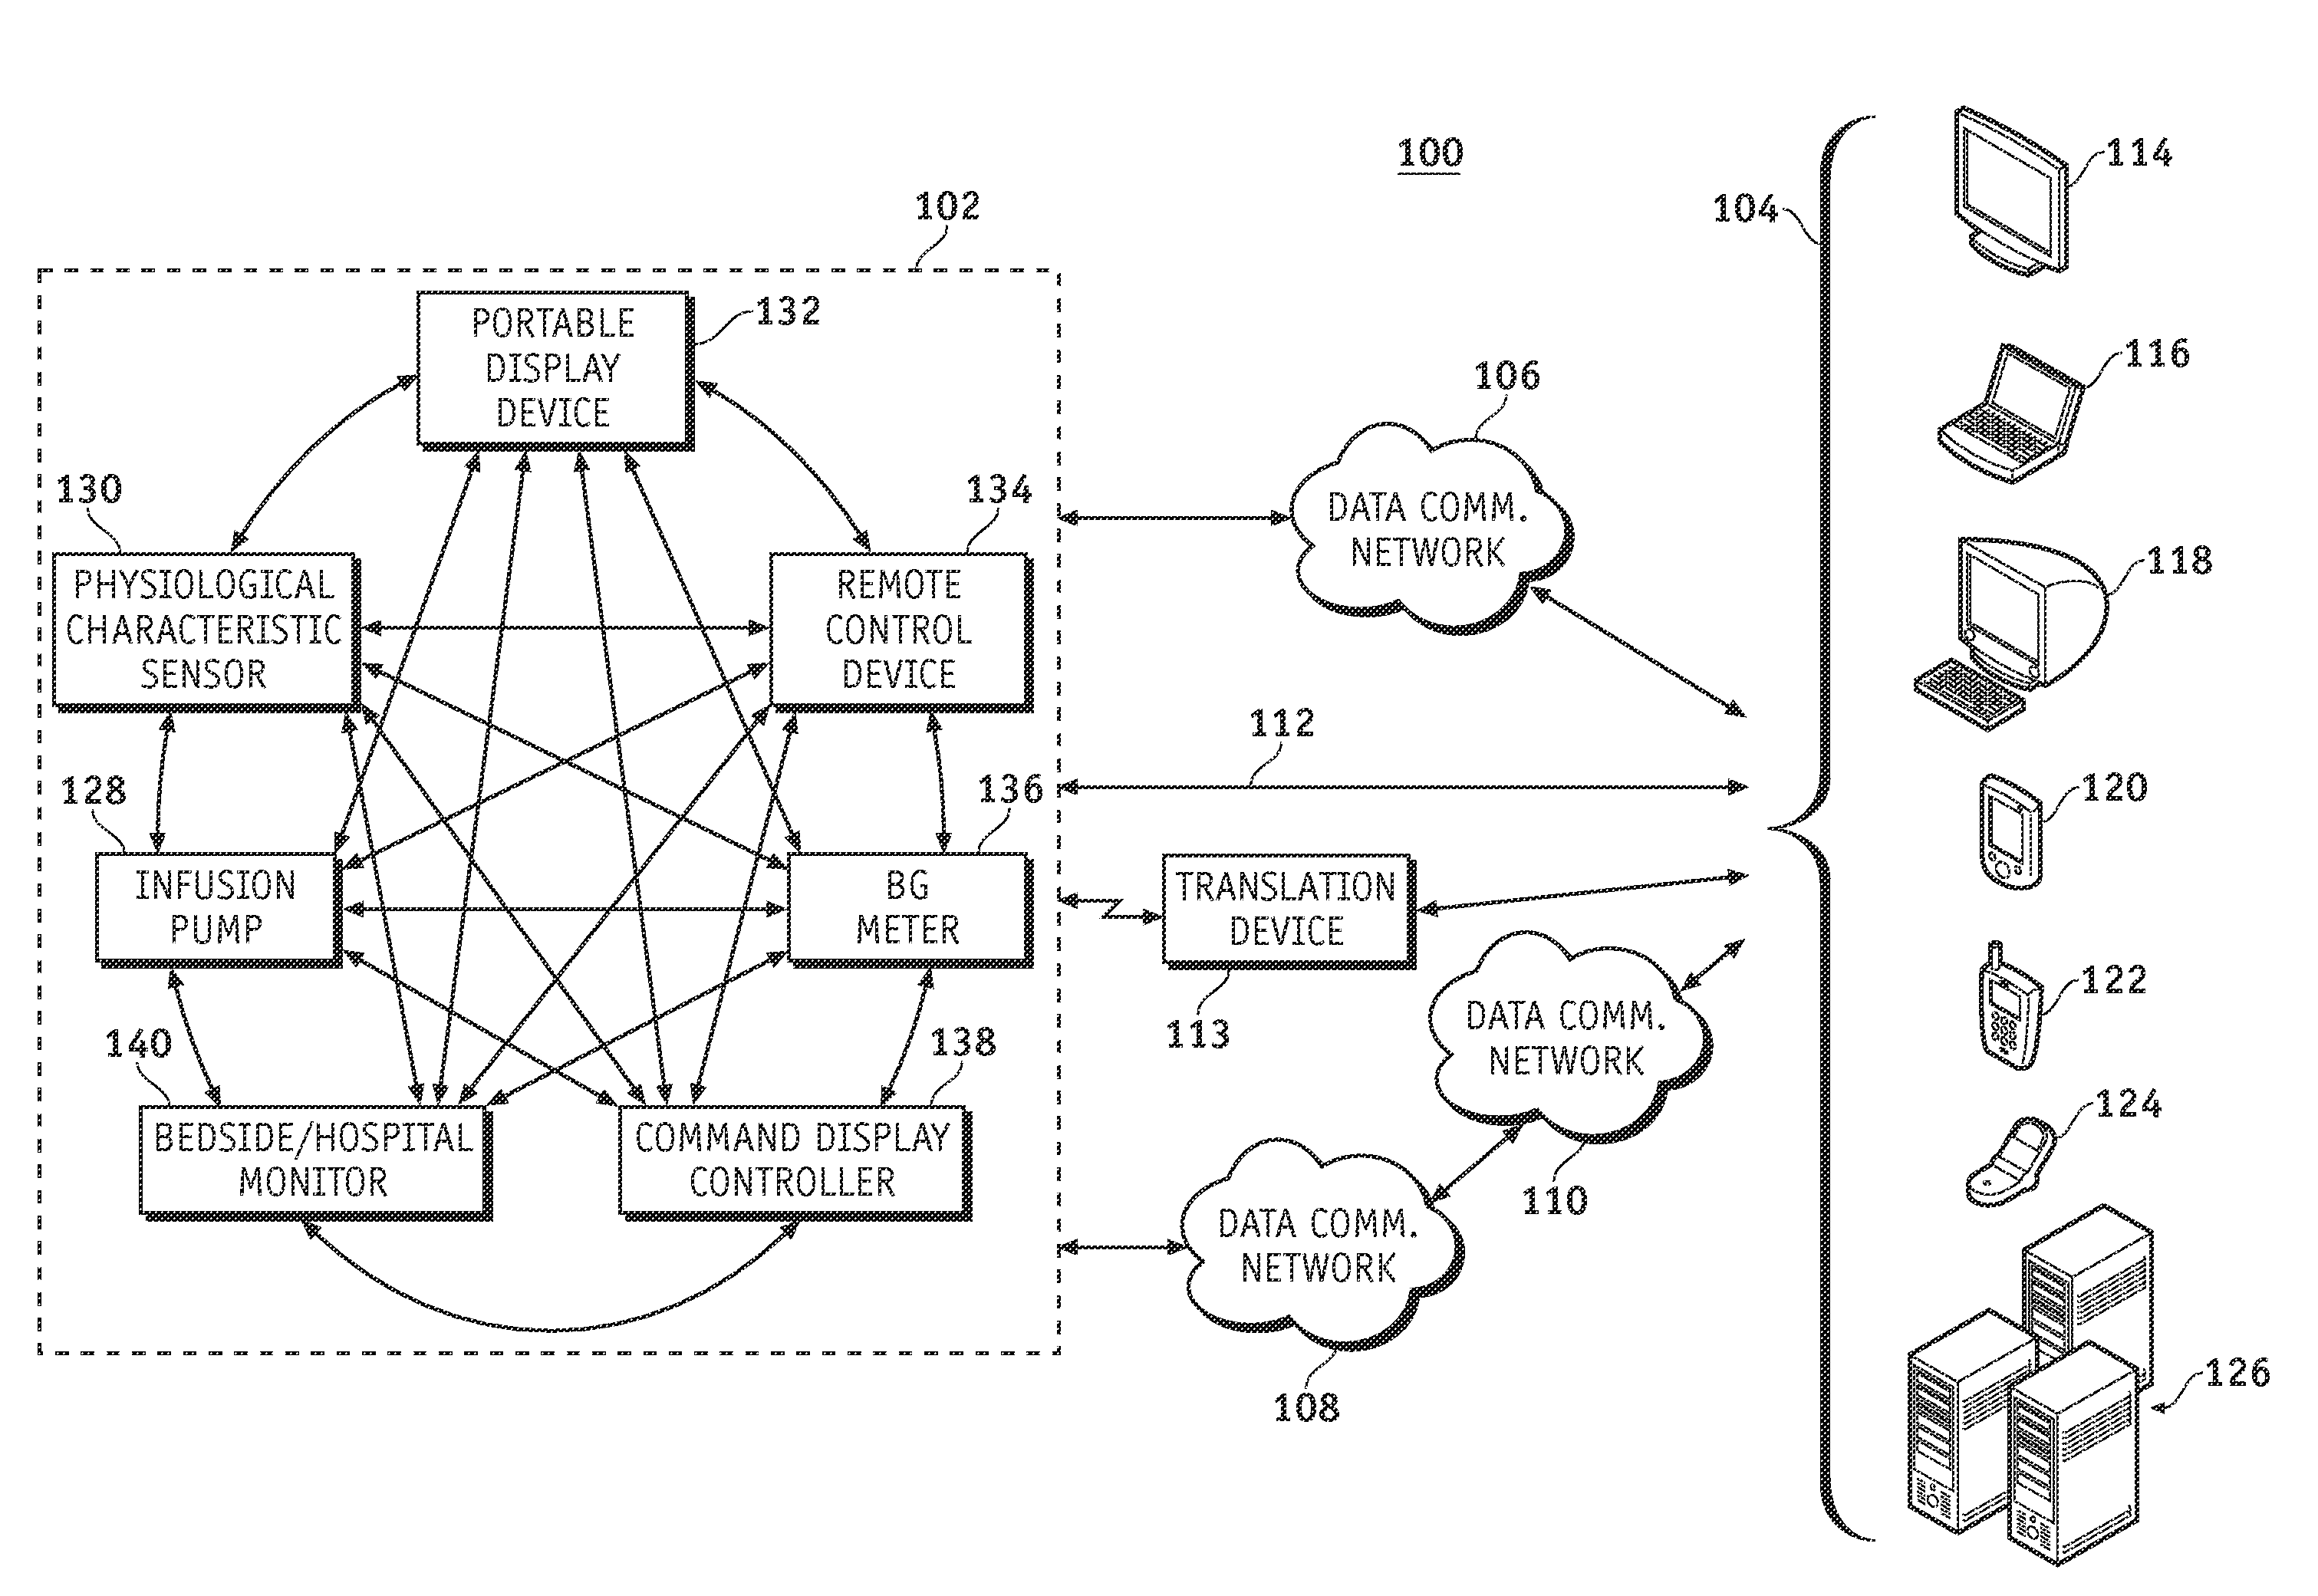 Wireless data communication for a medical device network that supports a plurality of data communication modes